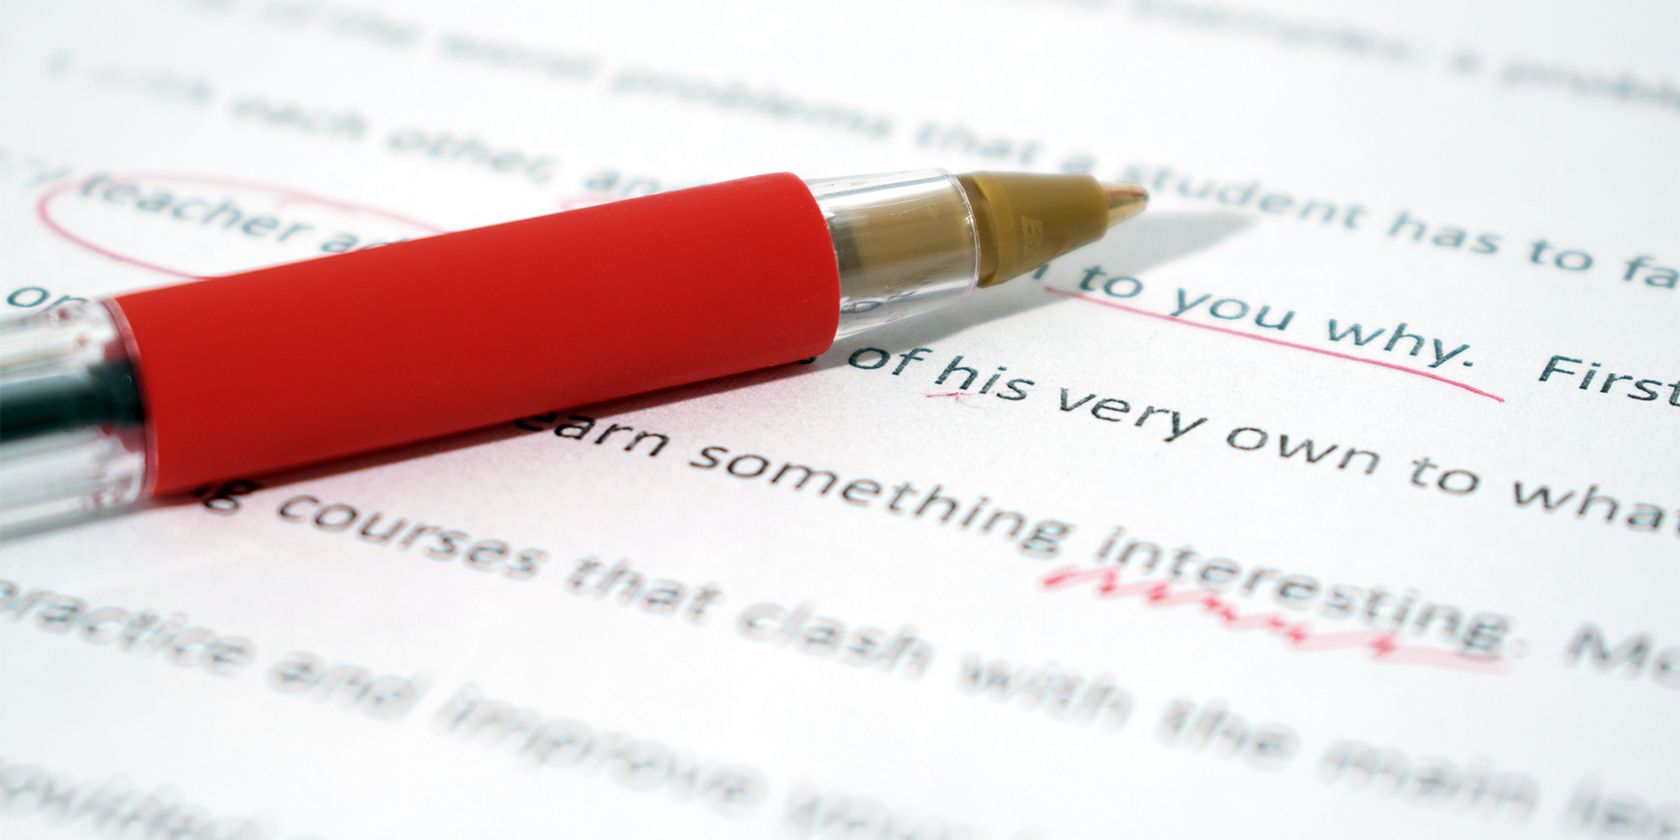 a red pen on a document being grammatically corrected